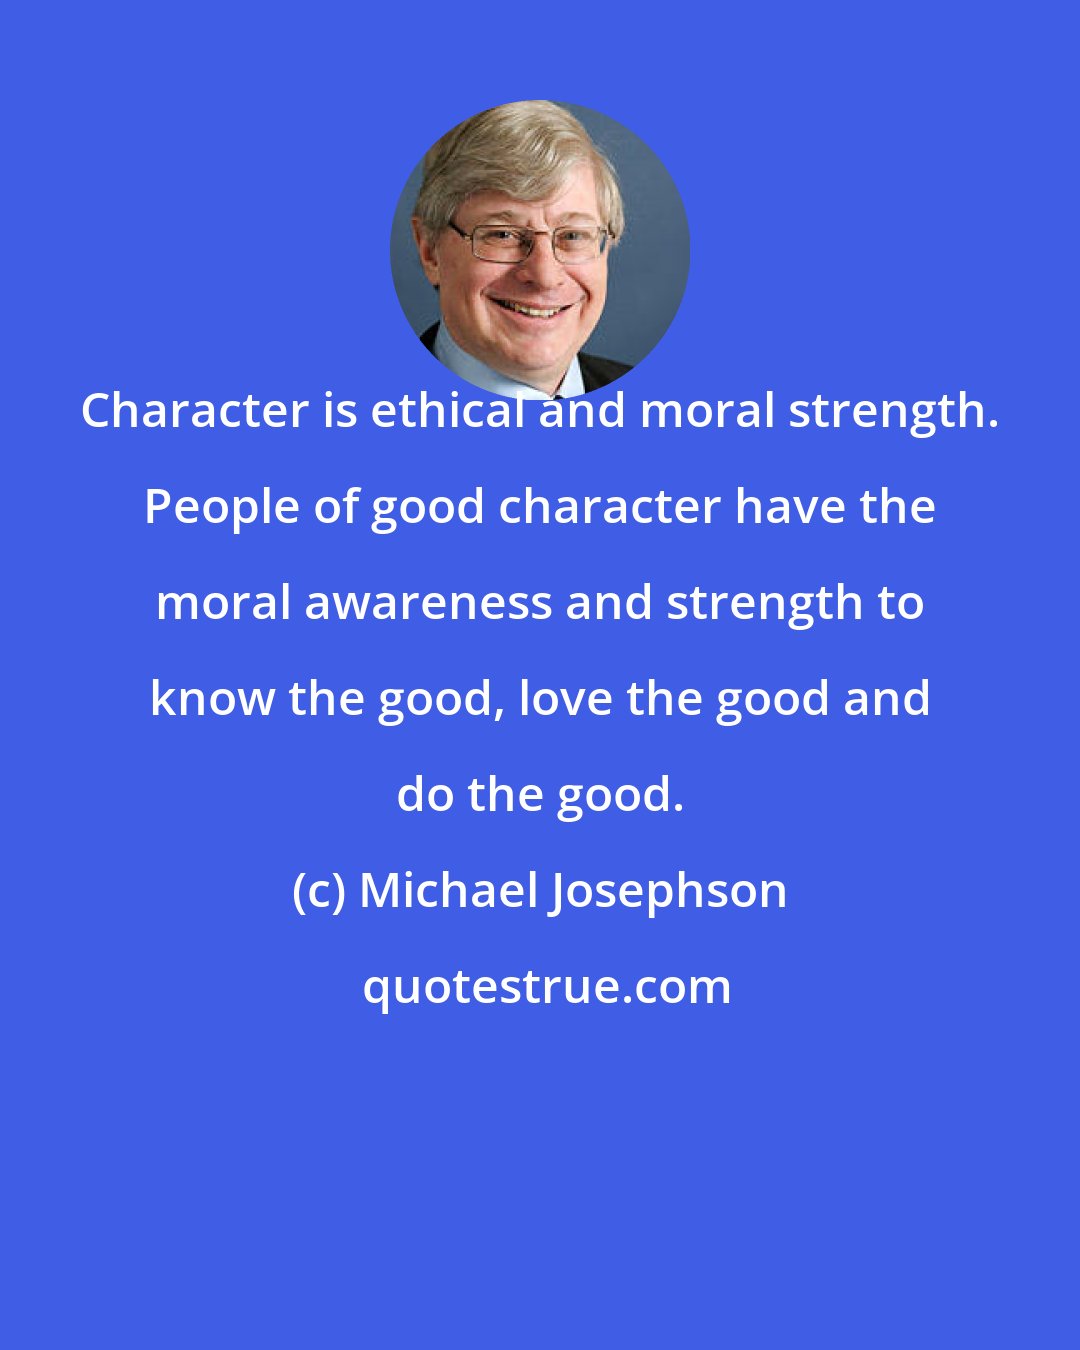 Michael Josephson: Character is ethical and moral strength. People of good character have the moral awareness and strength to know the good, love the good and do the good.